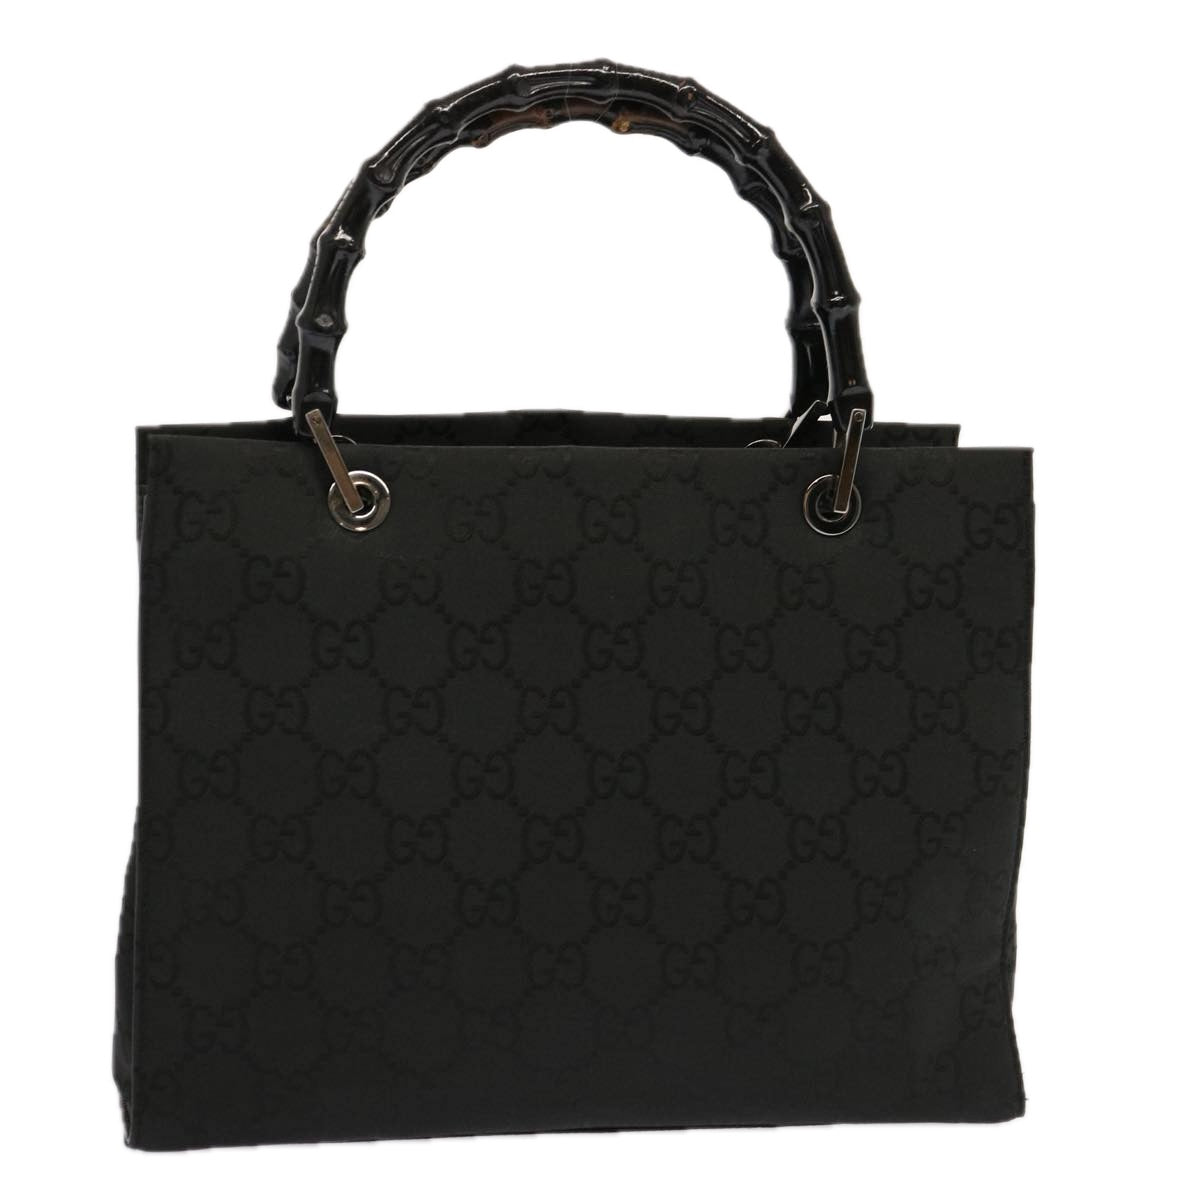 GUCCI Bamboo GG Canvas Hand Bag Black 002 1016 Auth yk11364